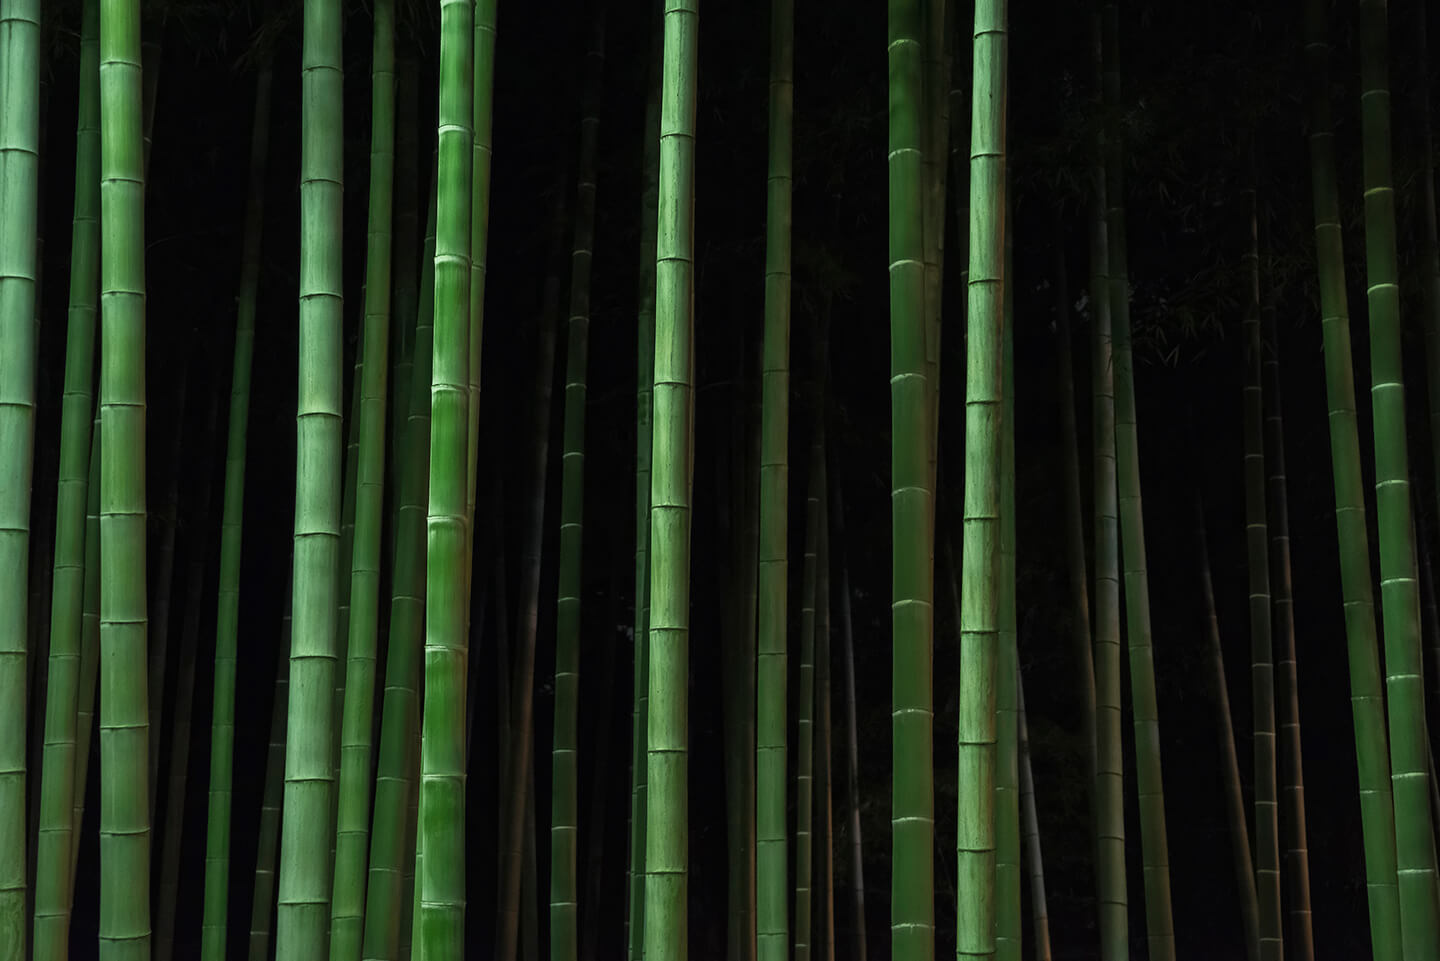 A lively green bamboo forest.